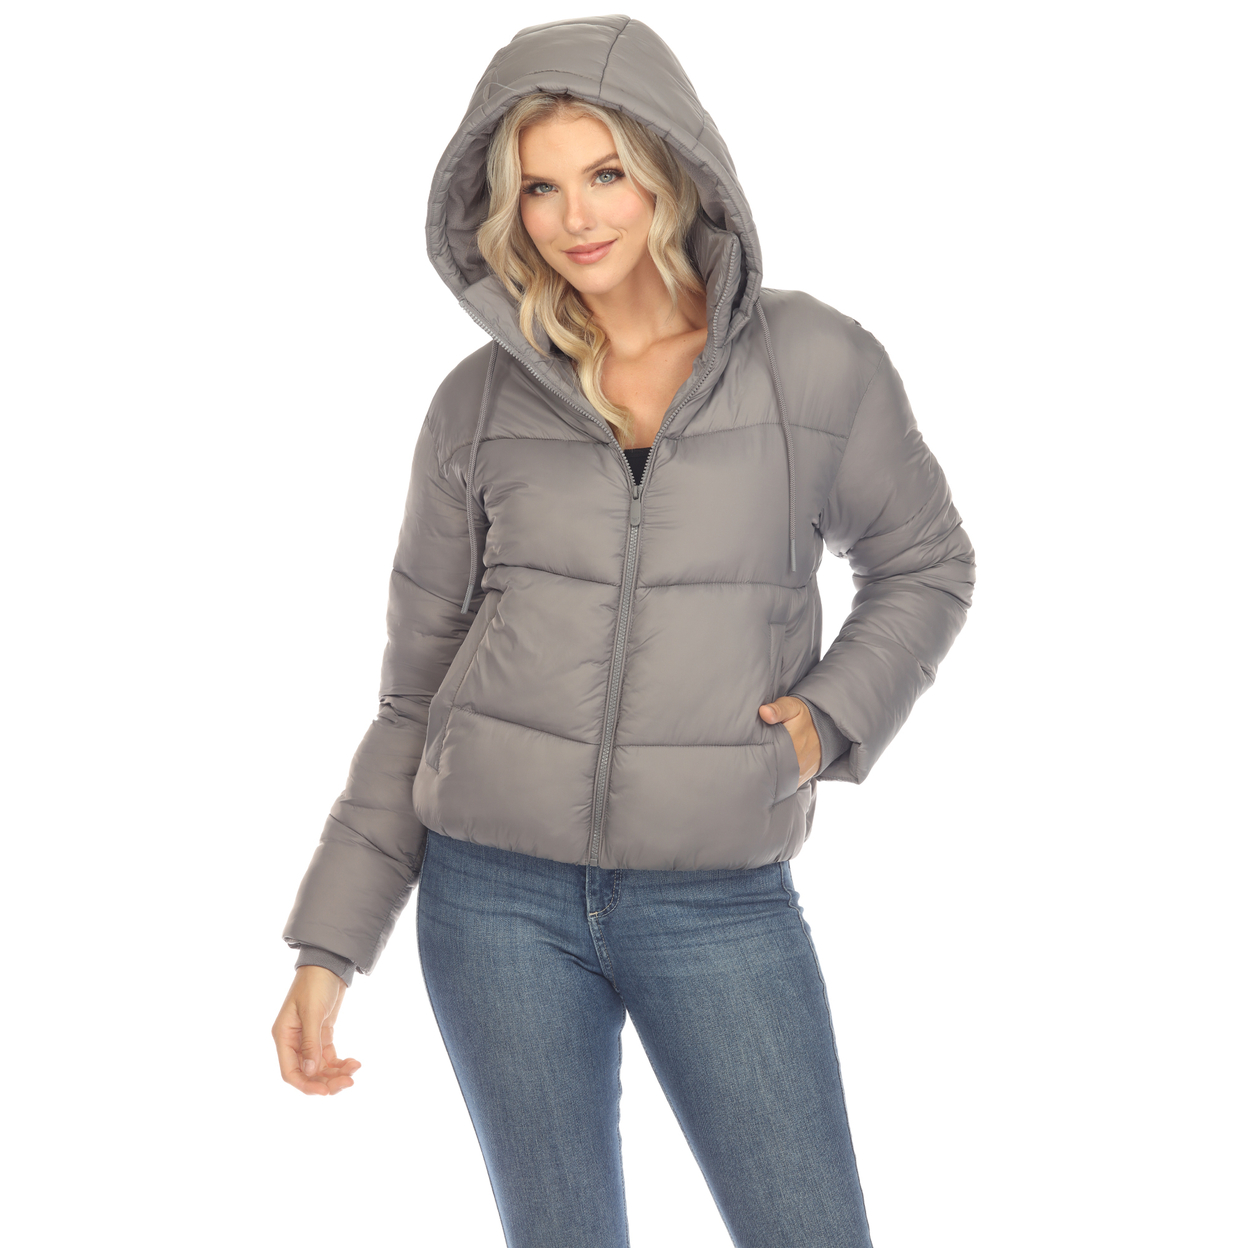 White Mark Women's Zip Hooded Puffer Jacket With Pockets - Gray, Small